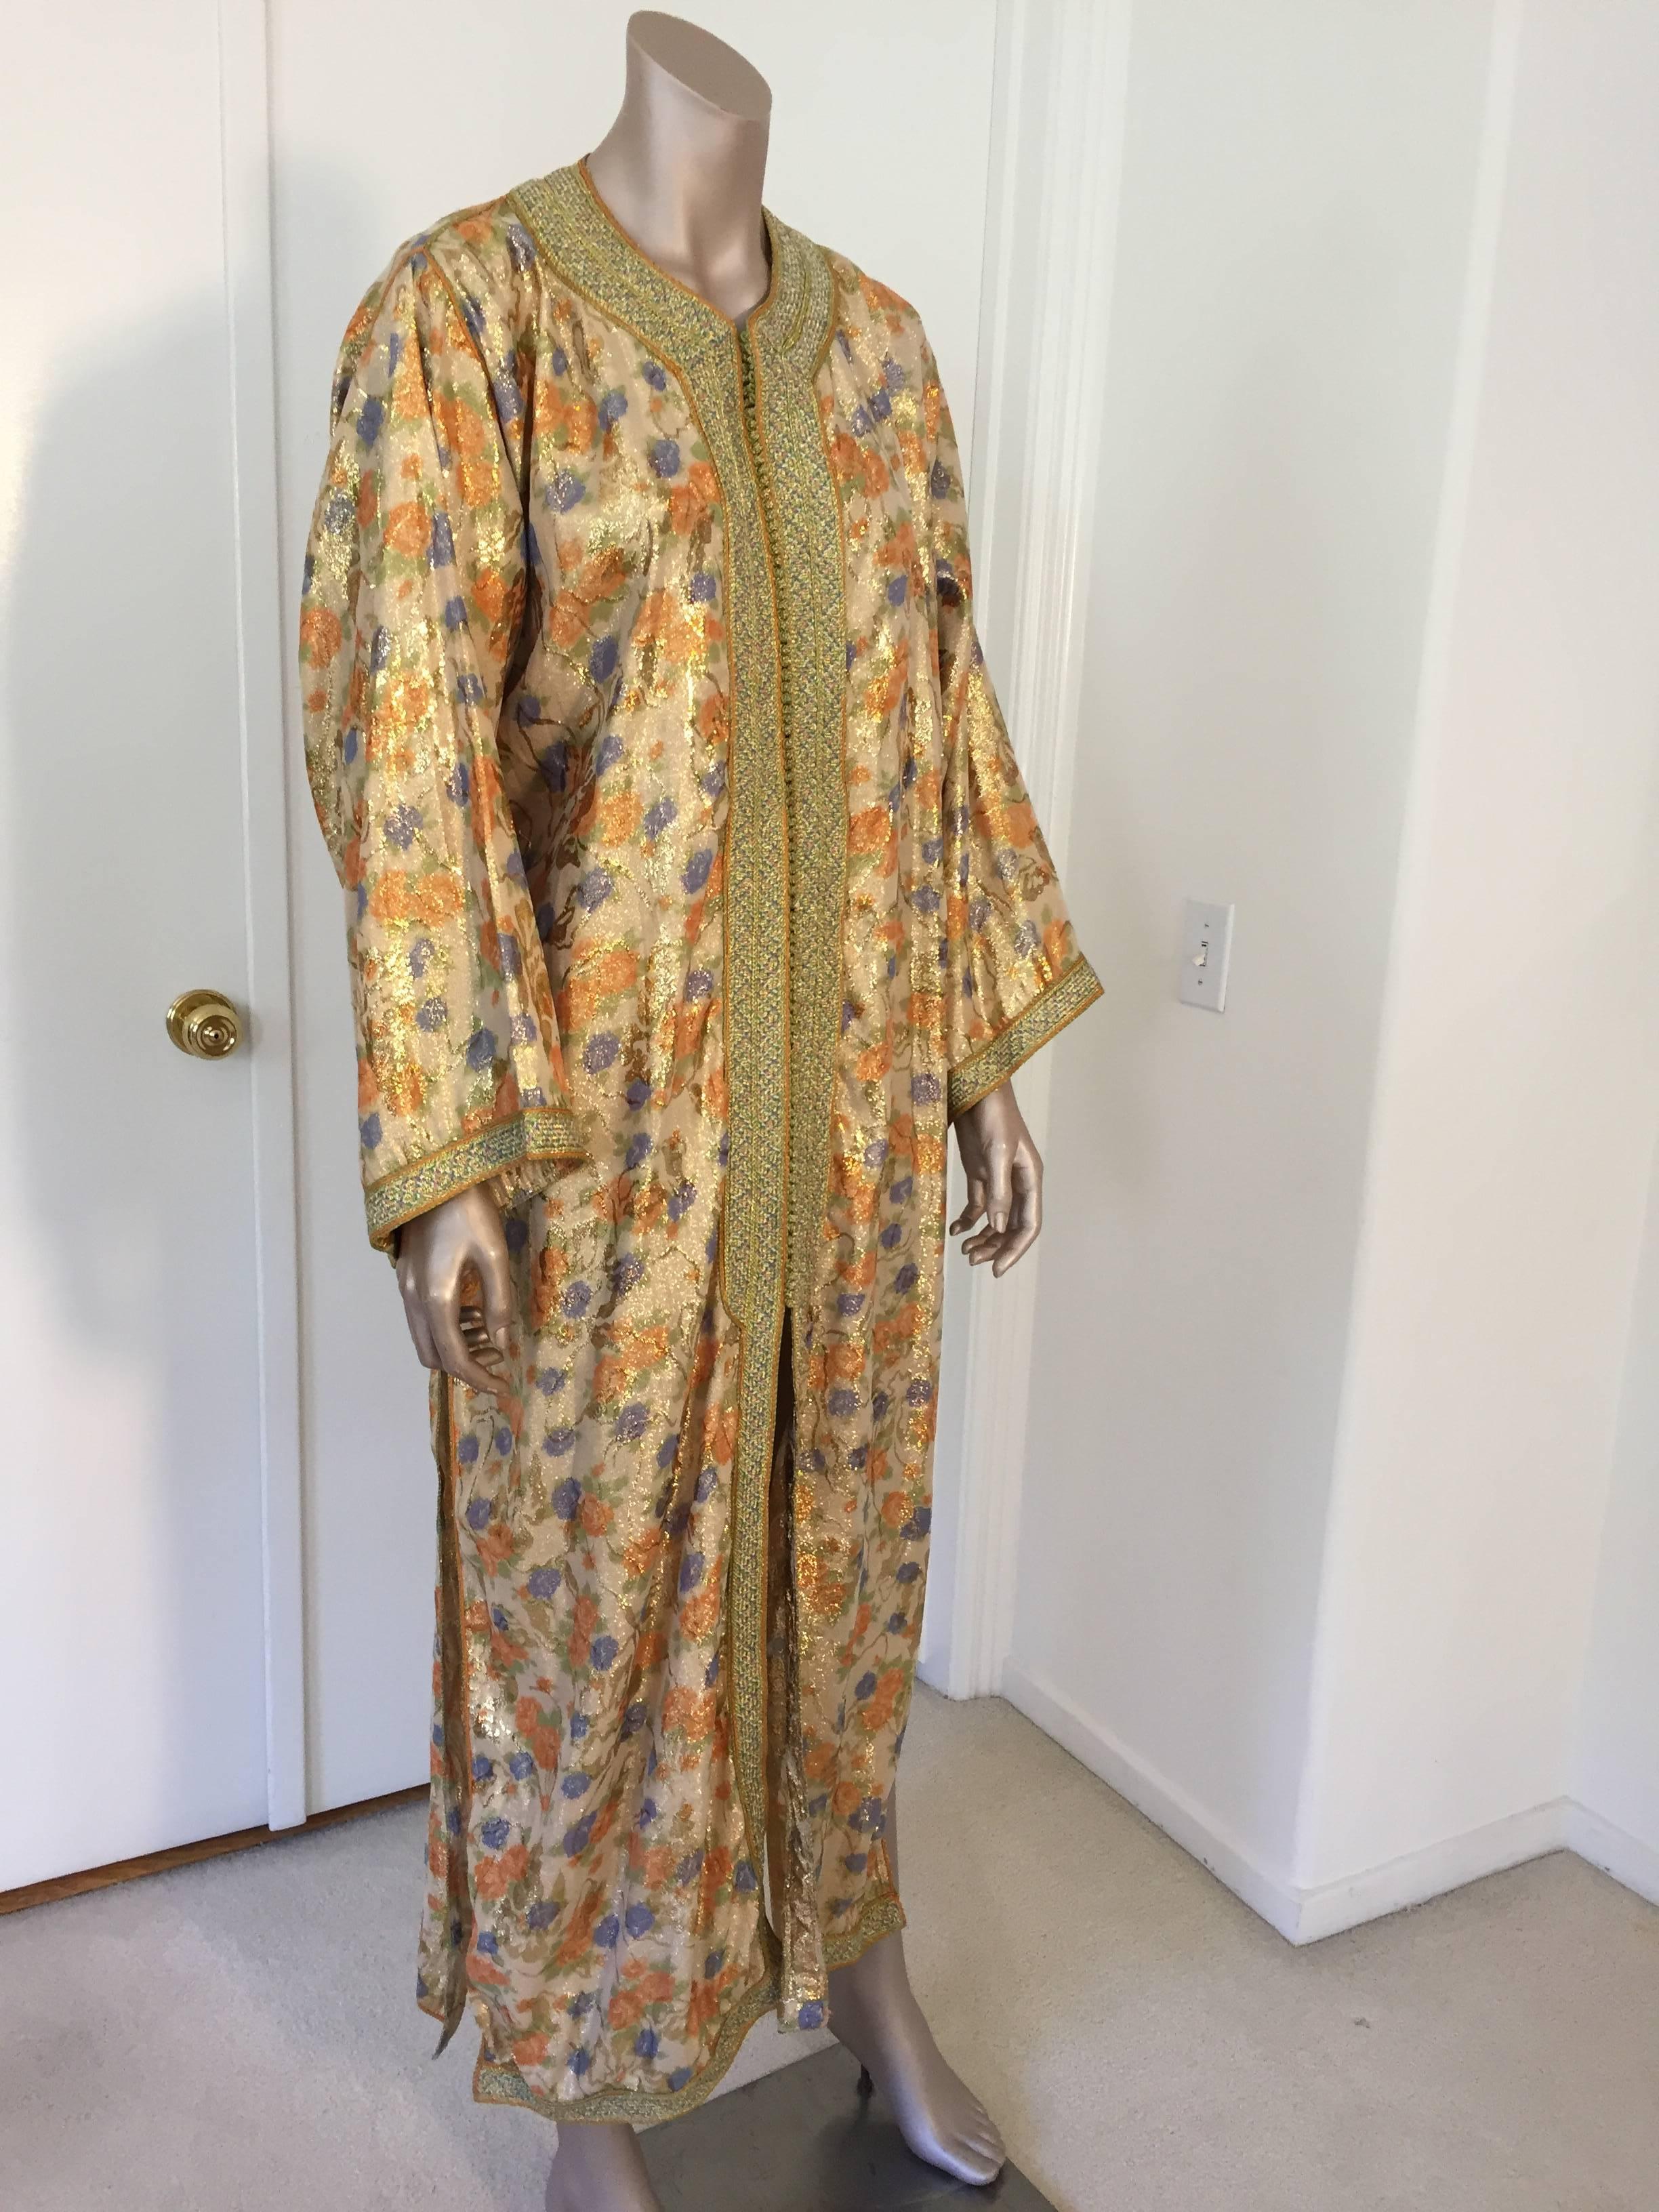 Elegant Moroccan caftan floral brocade embroidered with gold trim, circa 1970s. 
This long maxi dress kaftan is embroidered and embellished entirely by hand. 
One of a kind evening Moroccan Middle Eastern hostess gown. 
The kaftan gown features a